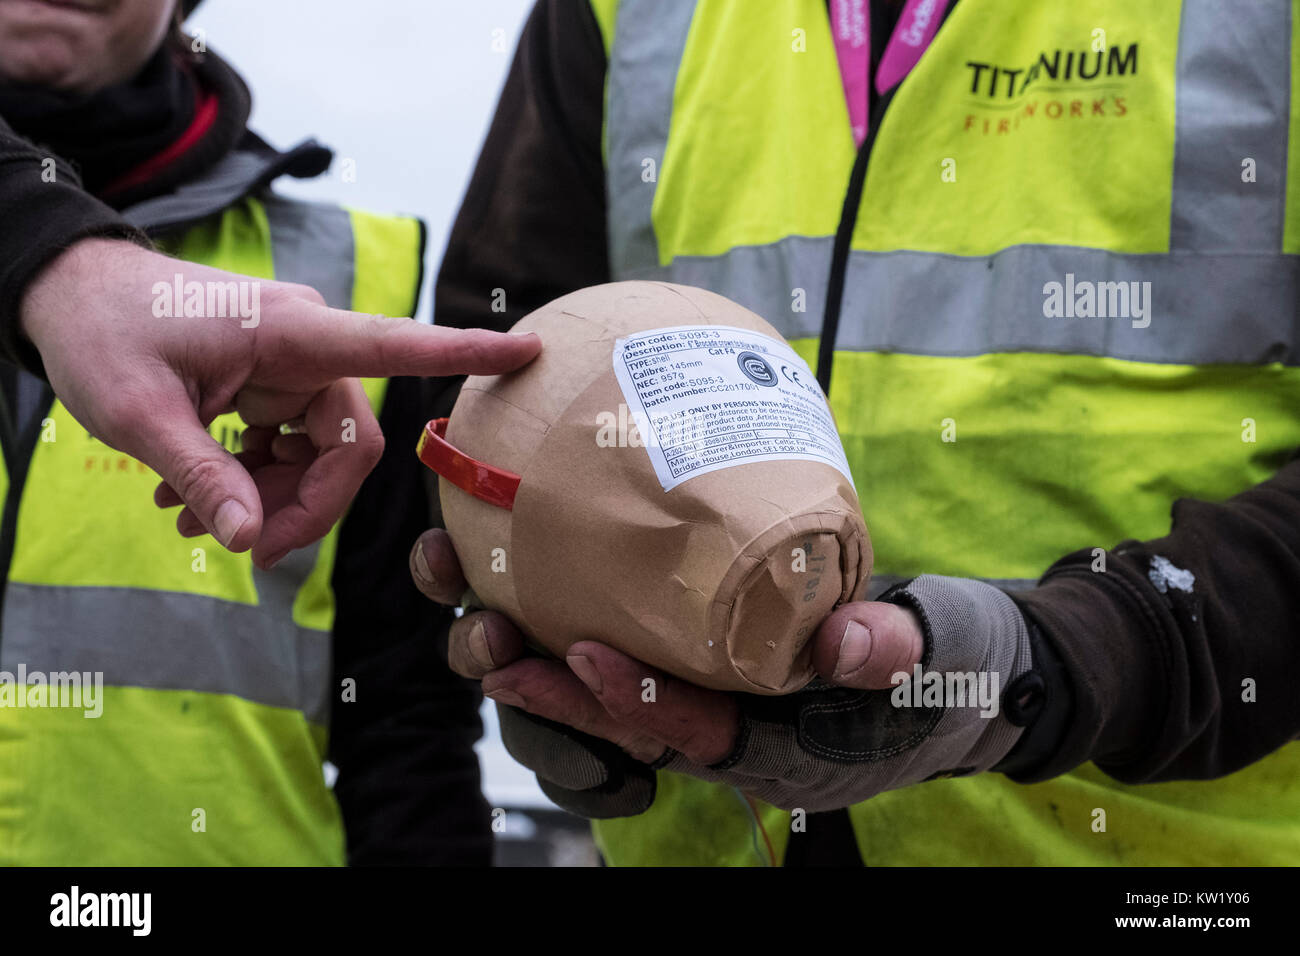 Edinburgh, Scotland, United Kingdom. 29th Dec, 2017. Pyrotechnicians from Titanium Fireworks demonstrate large fireworks and launching tubes at Edinburgh Castle ahead of the annual Hogmanay fireworks display on New Years Eve. Here a 150mm shell is shown. This is the largest shell used in the display. Credit: Iain Masterton/Alamy Live News Stock Photo